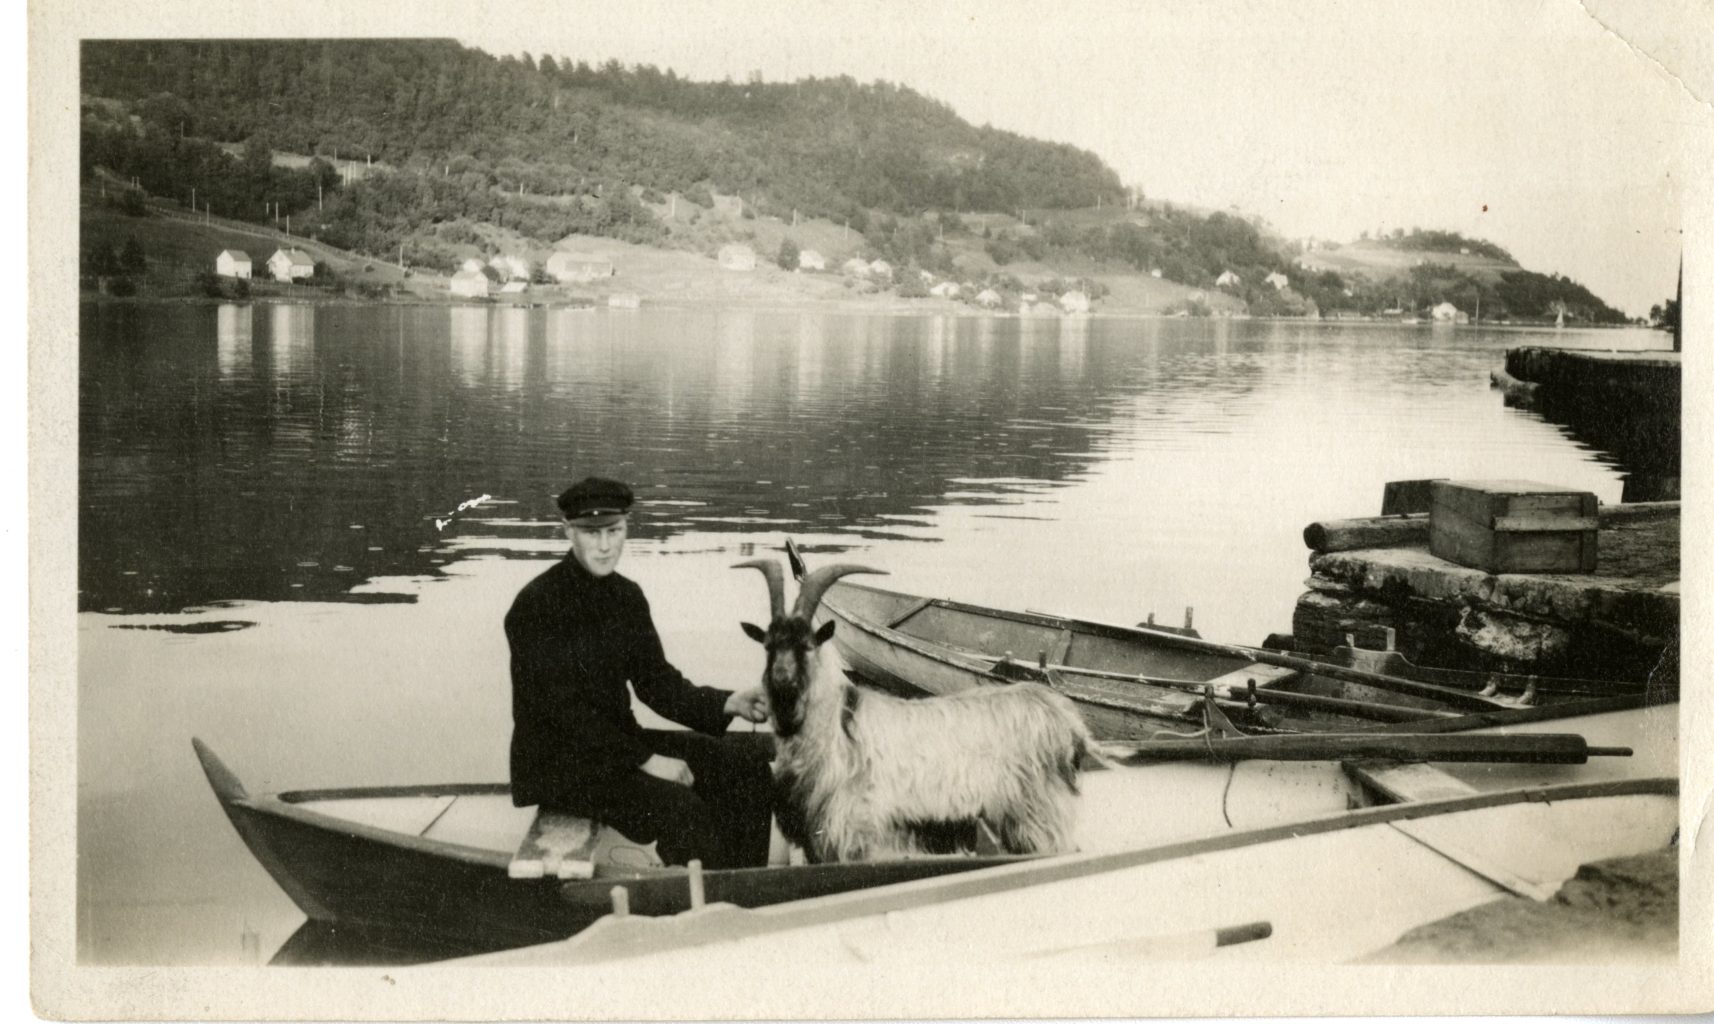 Man in a boat holds a goat. Town in the background on coast.